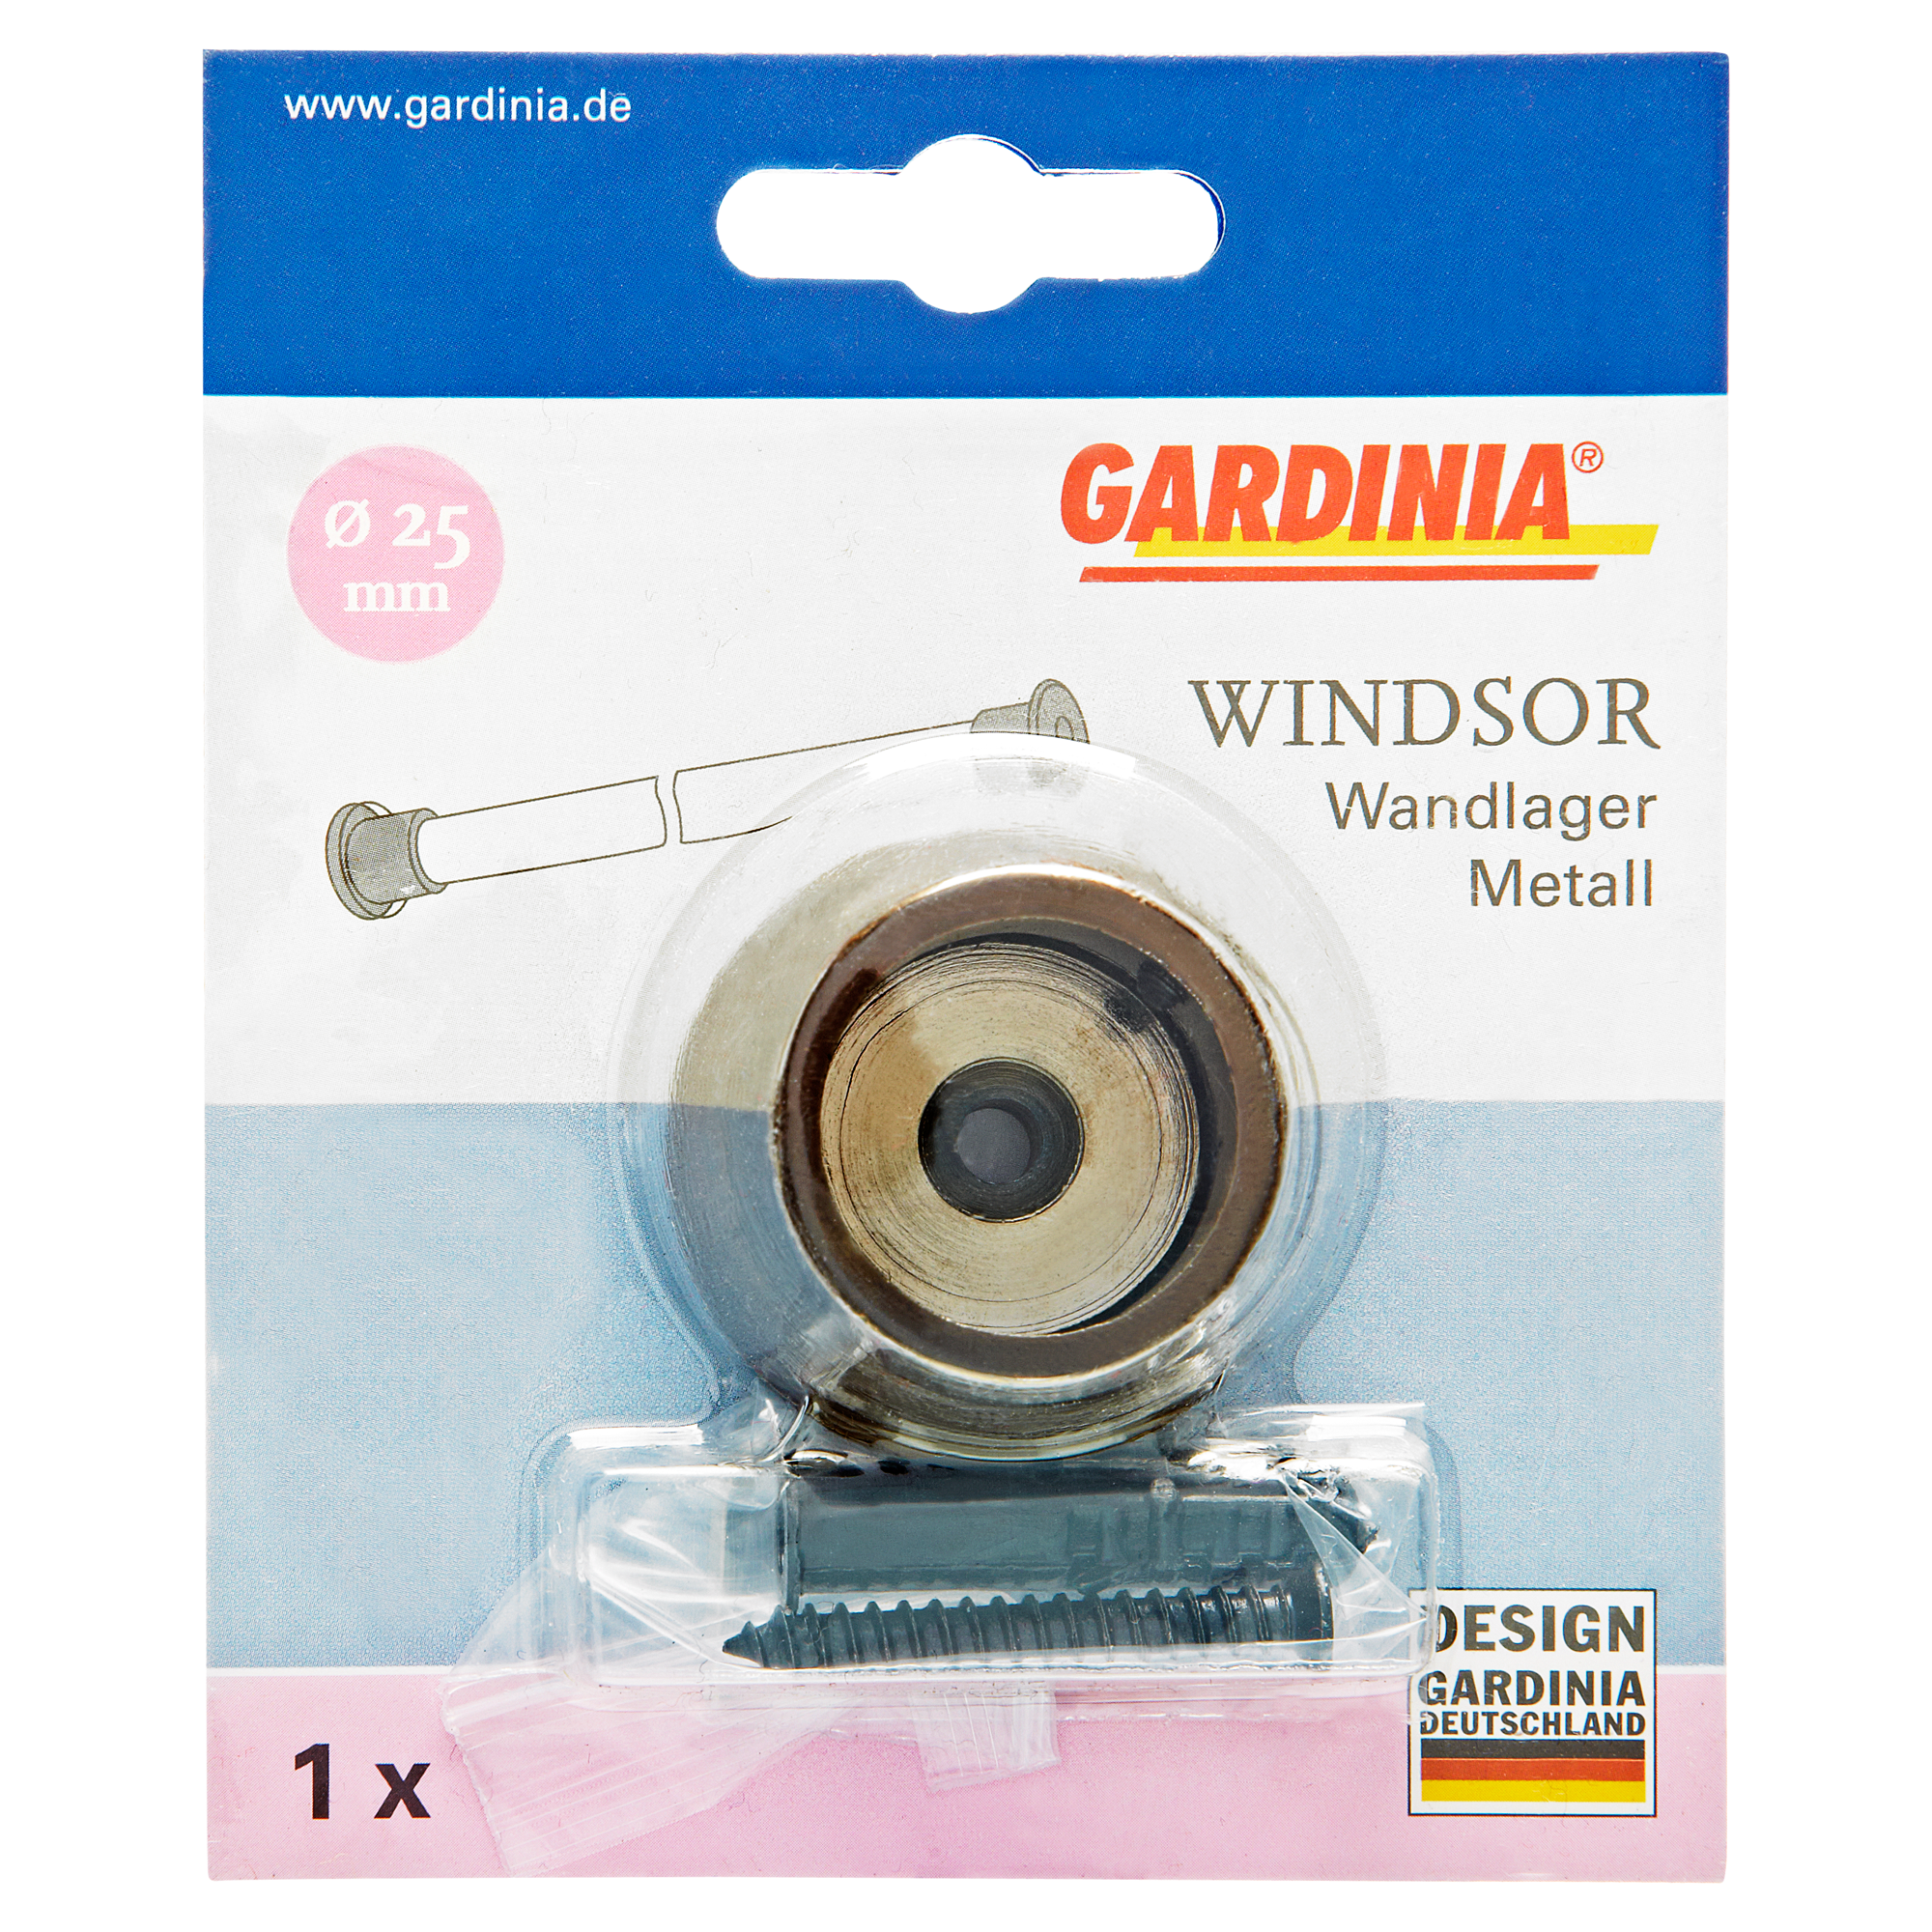 Gardinia Wandlager "Windsor" + product picture